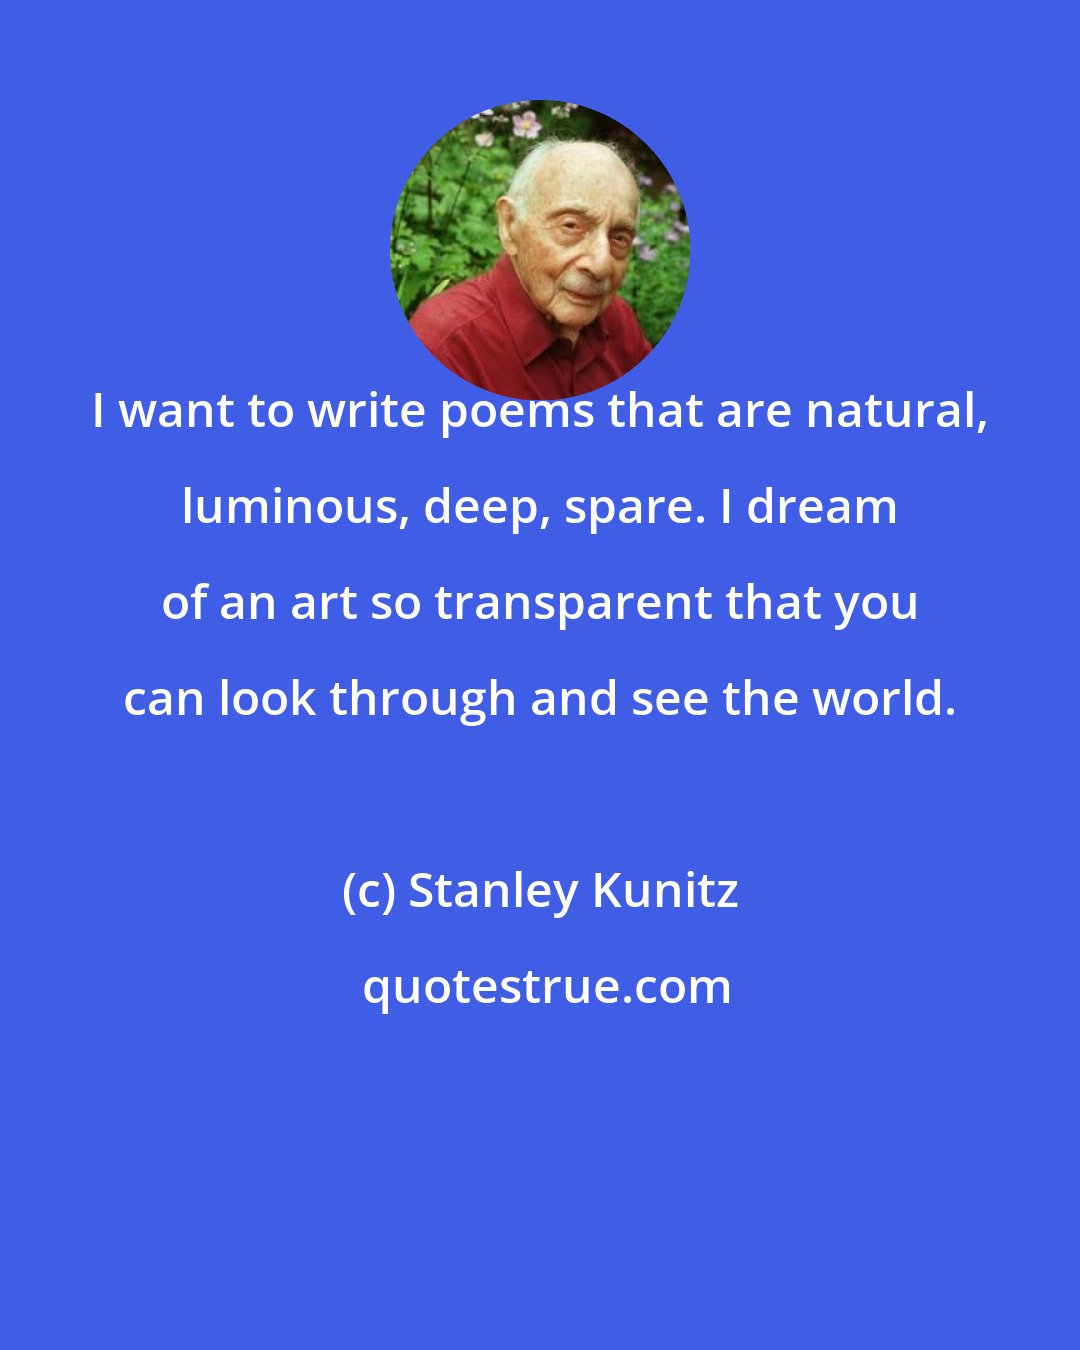 Stanley Kunitz: I want to write poems that are natural, luminous, deep, spare. I dream of an art so transparent that you can look through and see the world.